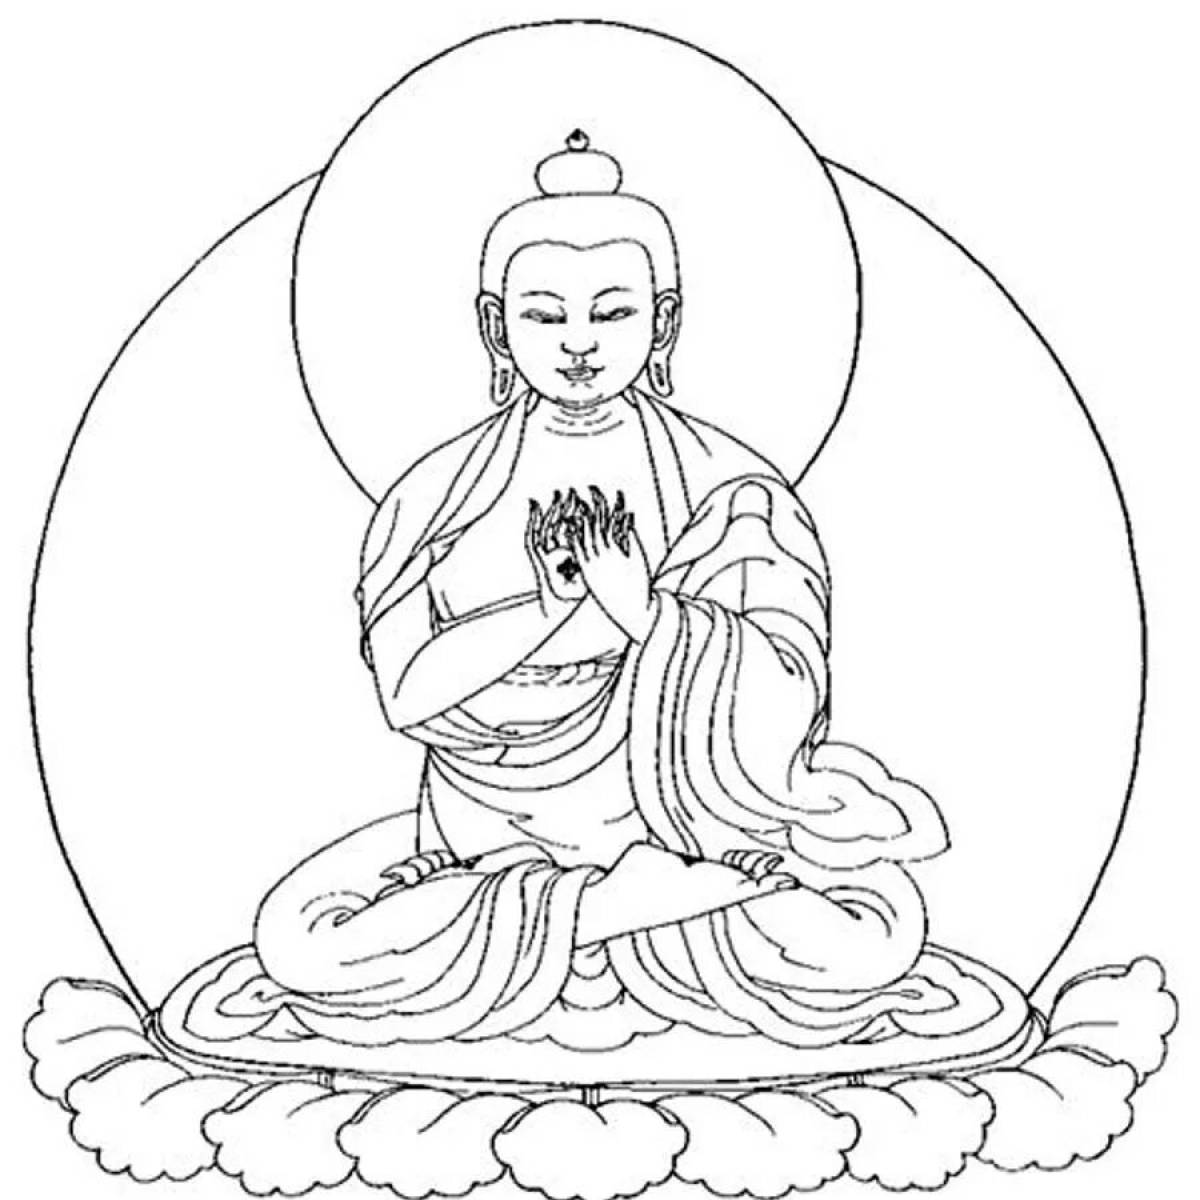 A fascinating coloring book of Buddhism